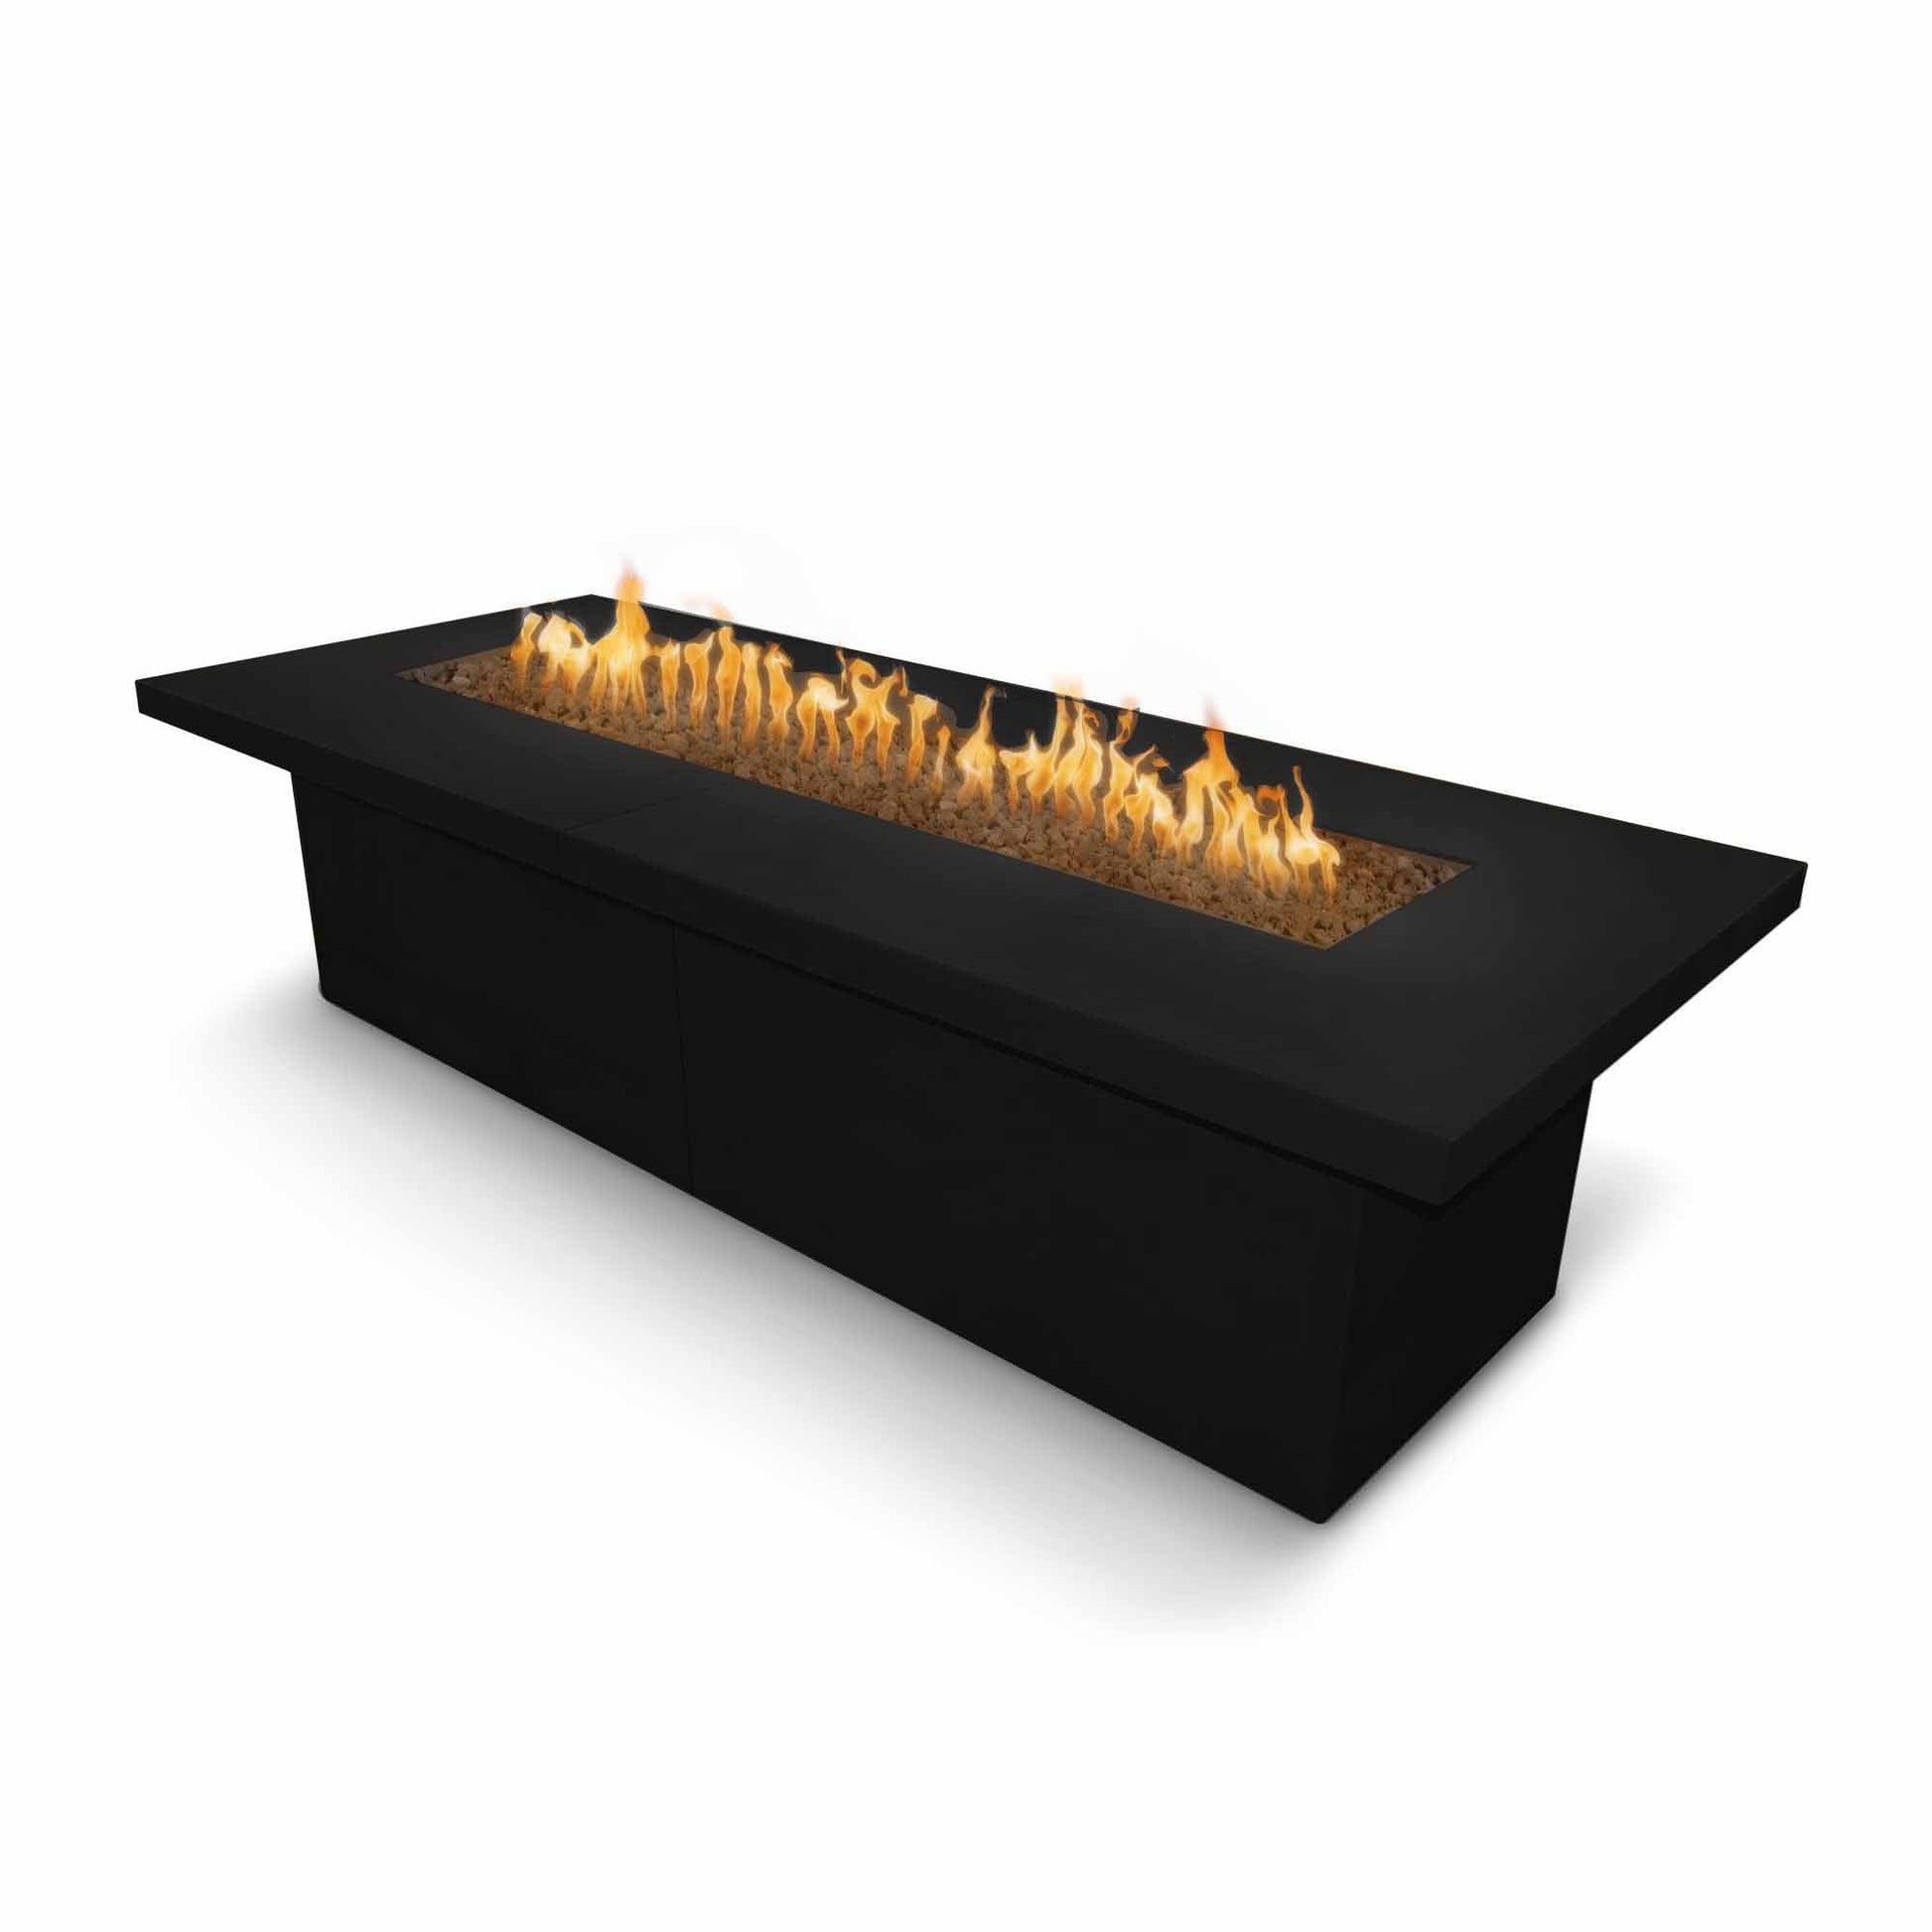 The Outdoor Plus Rectangular Newport 72" Java Powder Coated Metal Liquid Propane Fire Pit with 110V Electronic Ignition